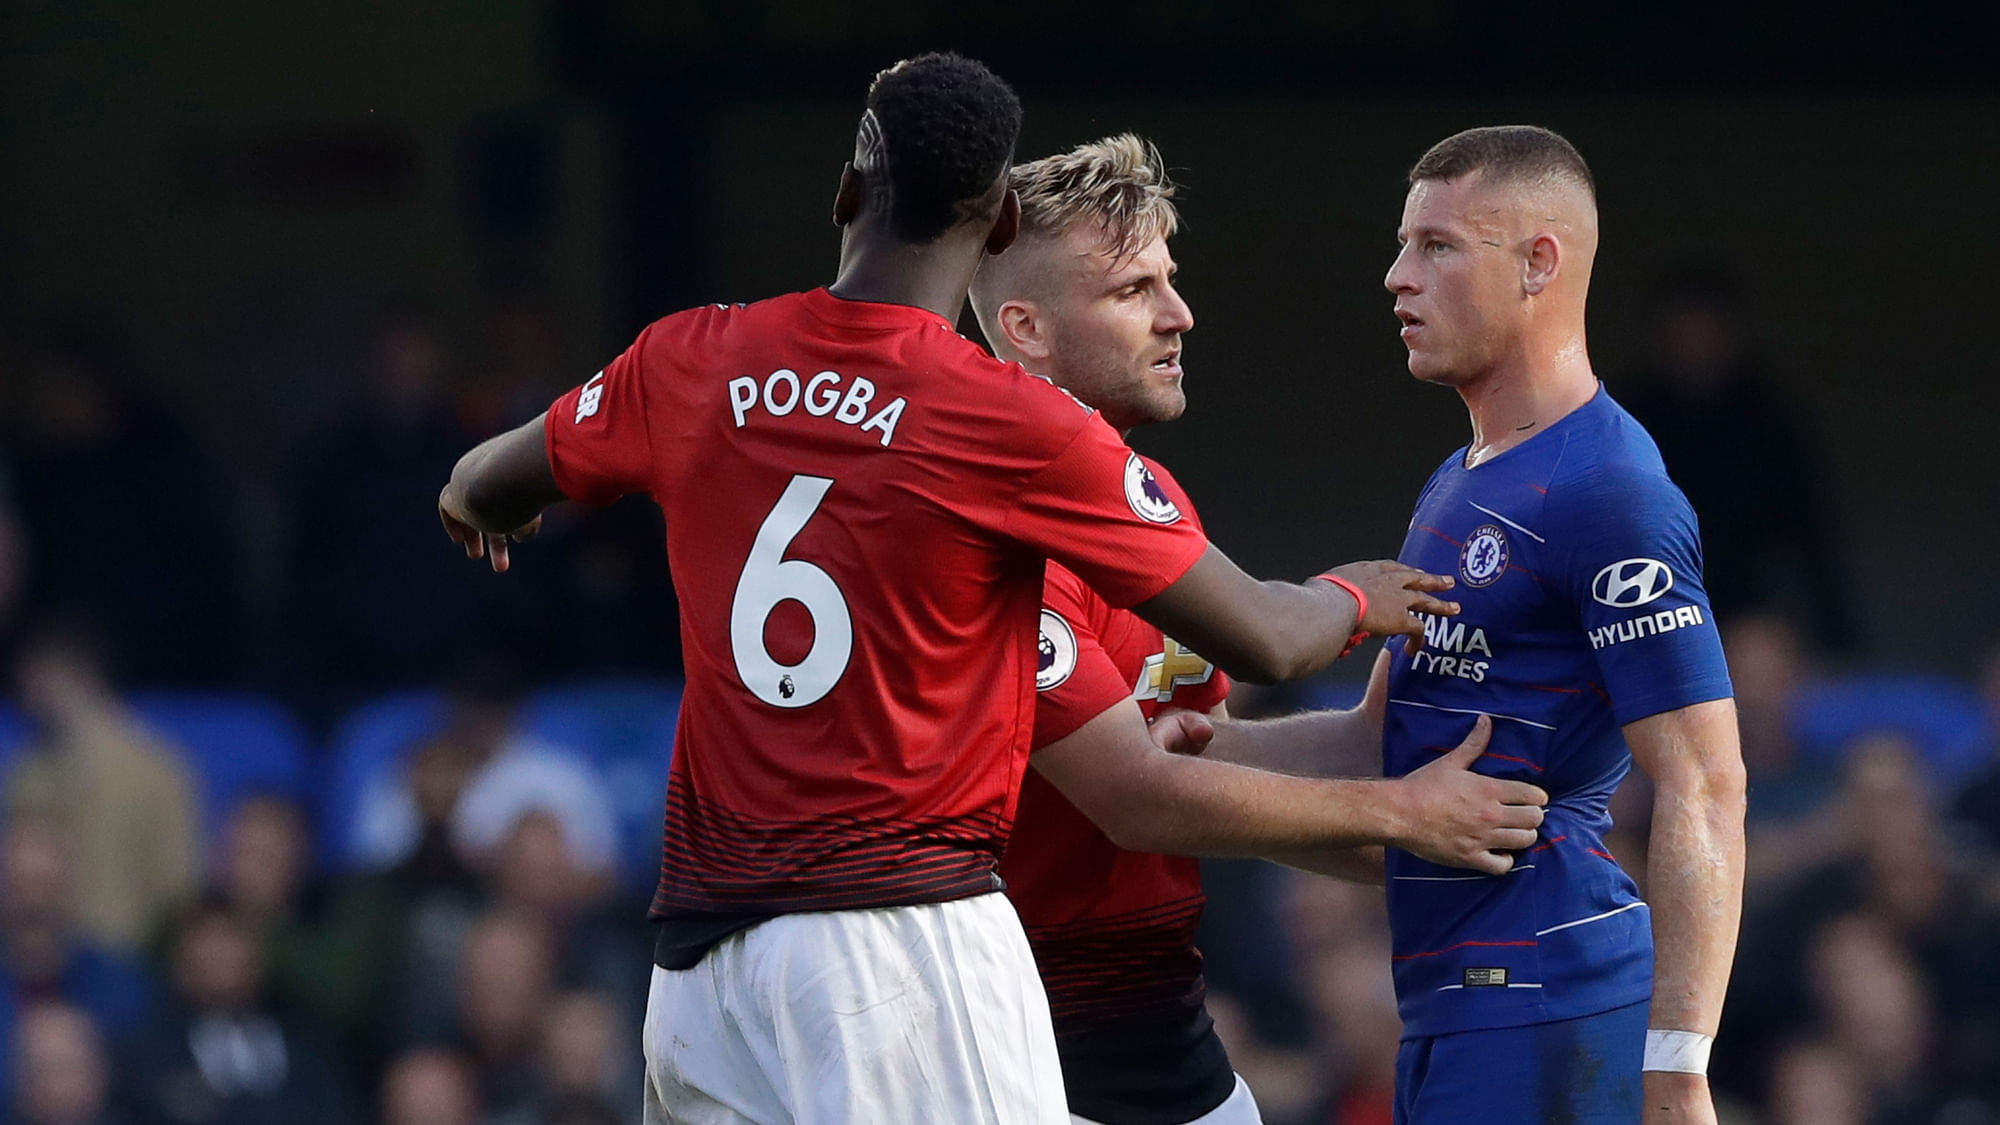 ManU defender Luke Shaw, center and Paul Pogba argue with Chelsea’s Ross Barkley, right, after he scored his side’s second goal.